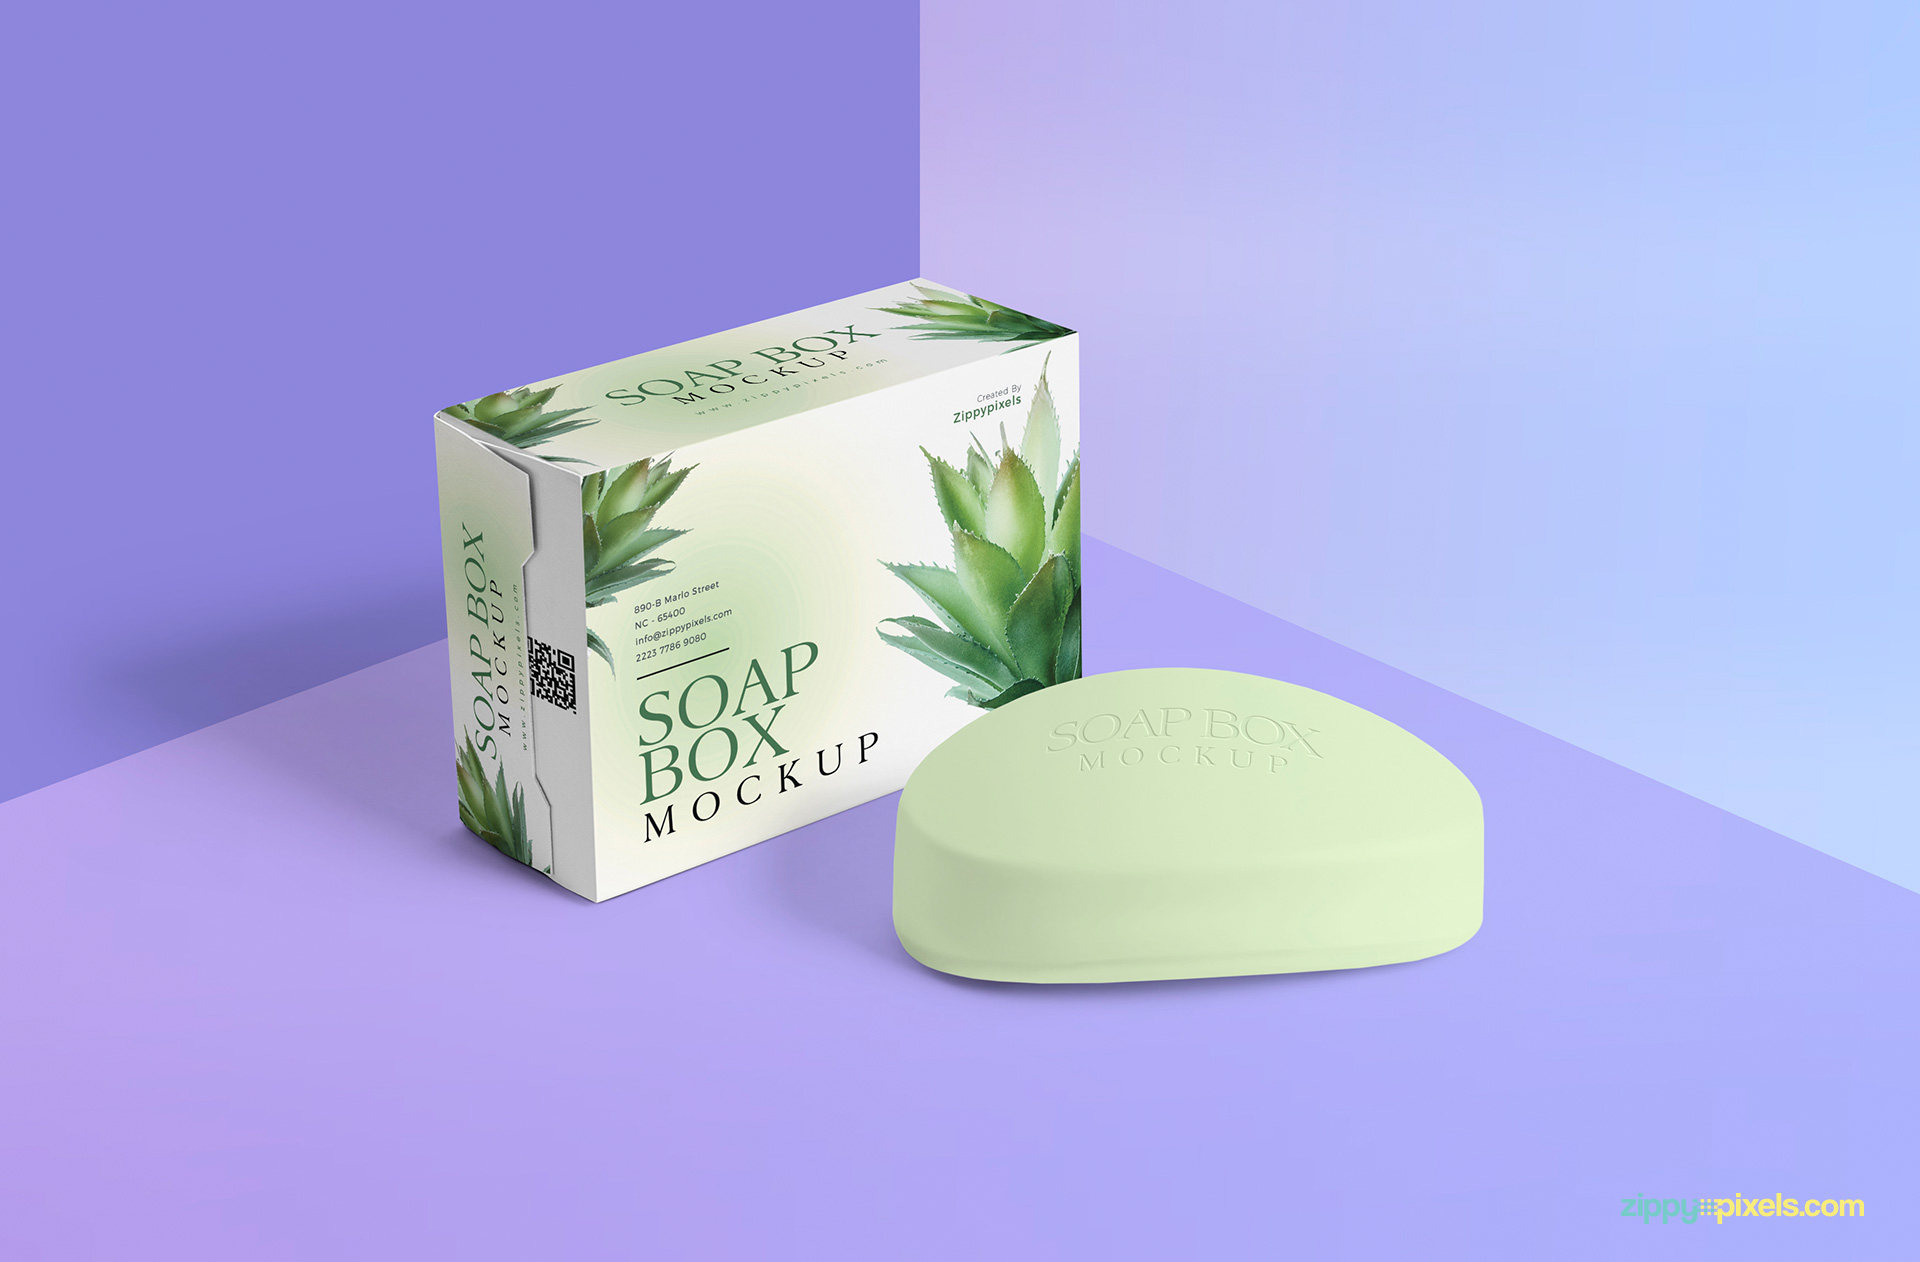 Full view of the packaging box and soap mockup.